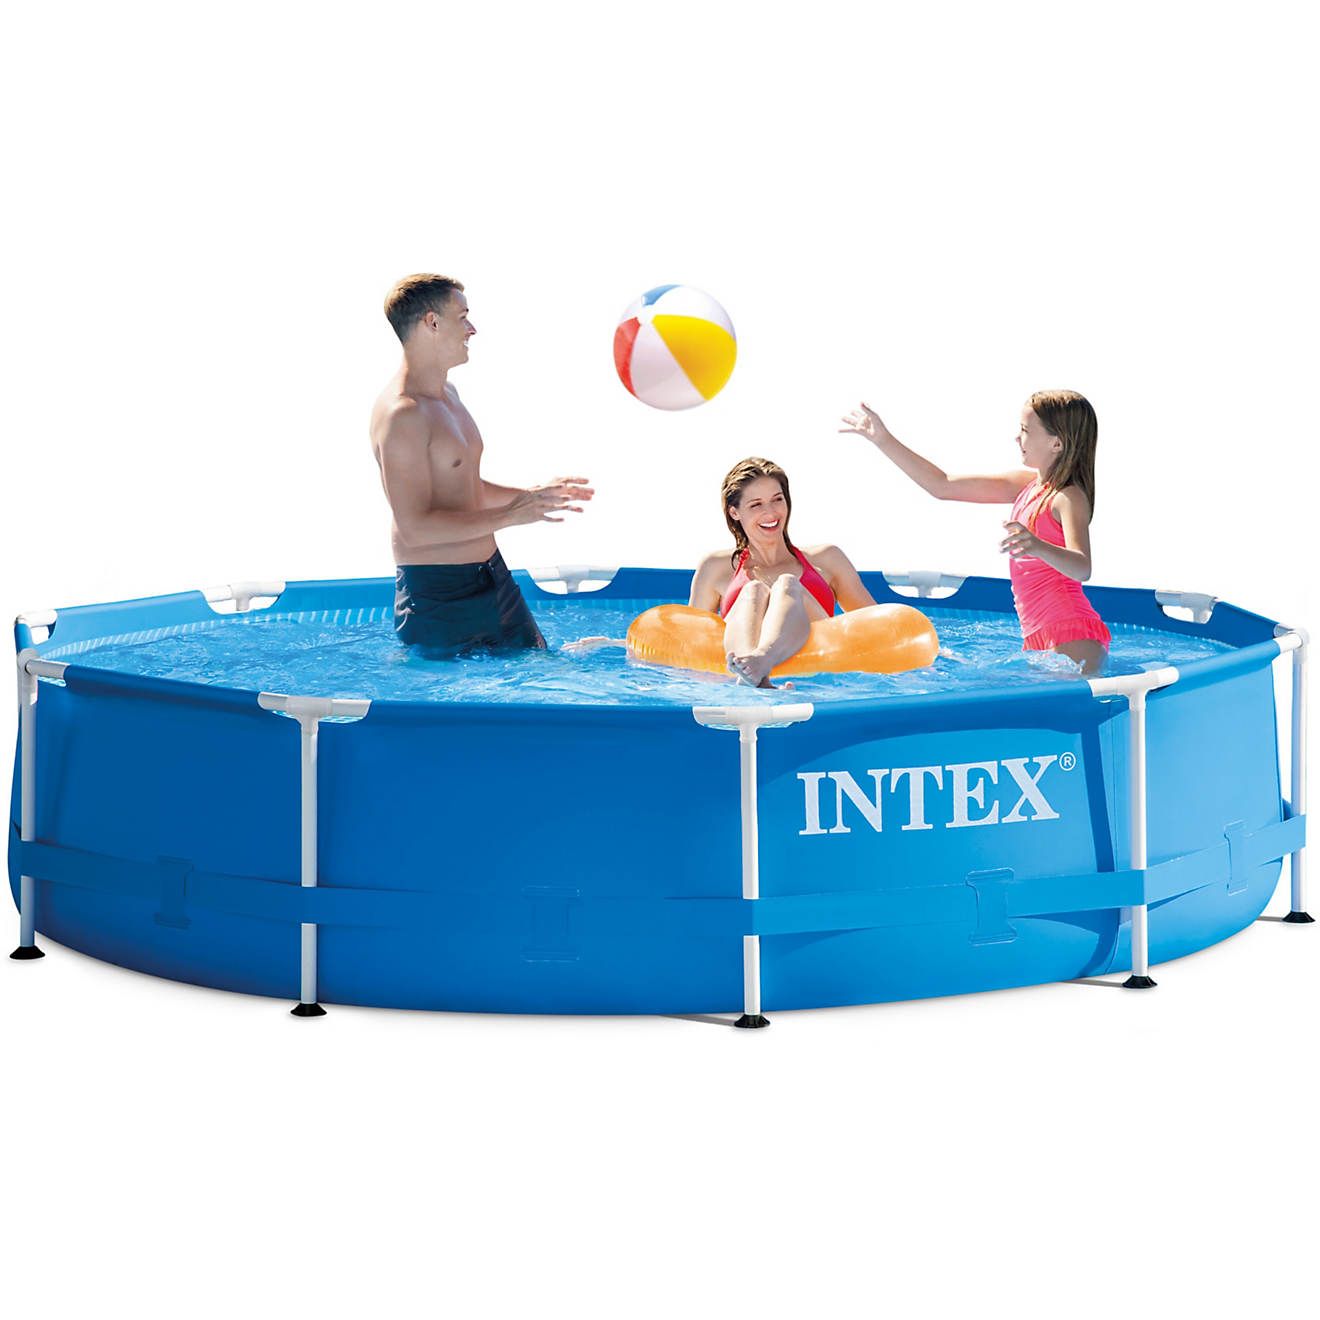 INTEX 10 ft x 30 in Round Above-Ground Pool | Academy Sports + Outdoor Affiliate